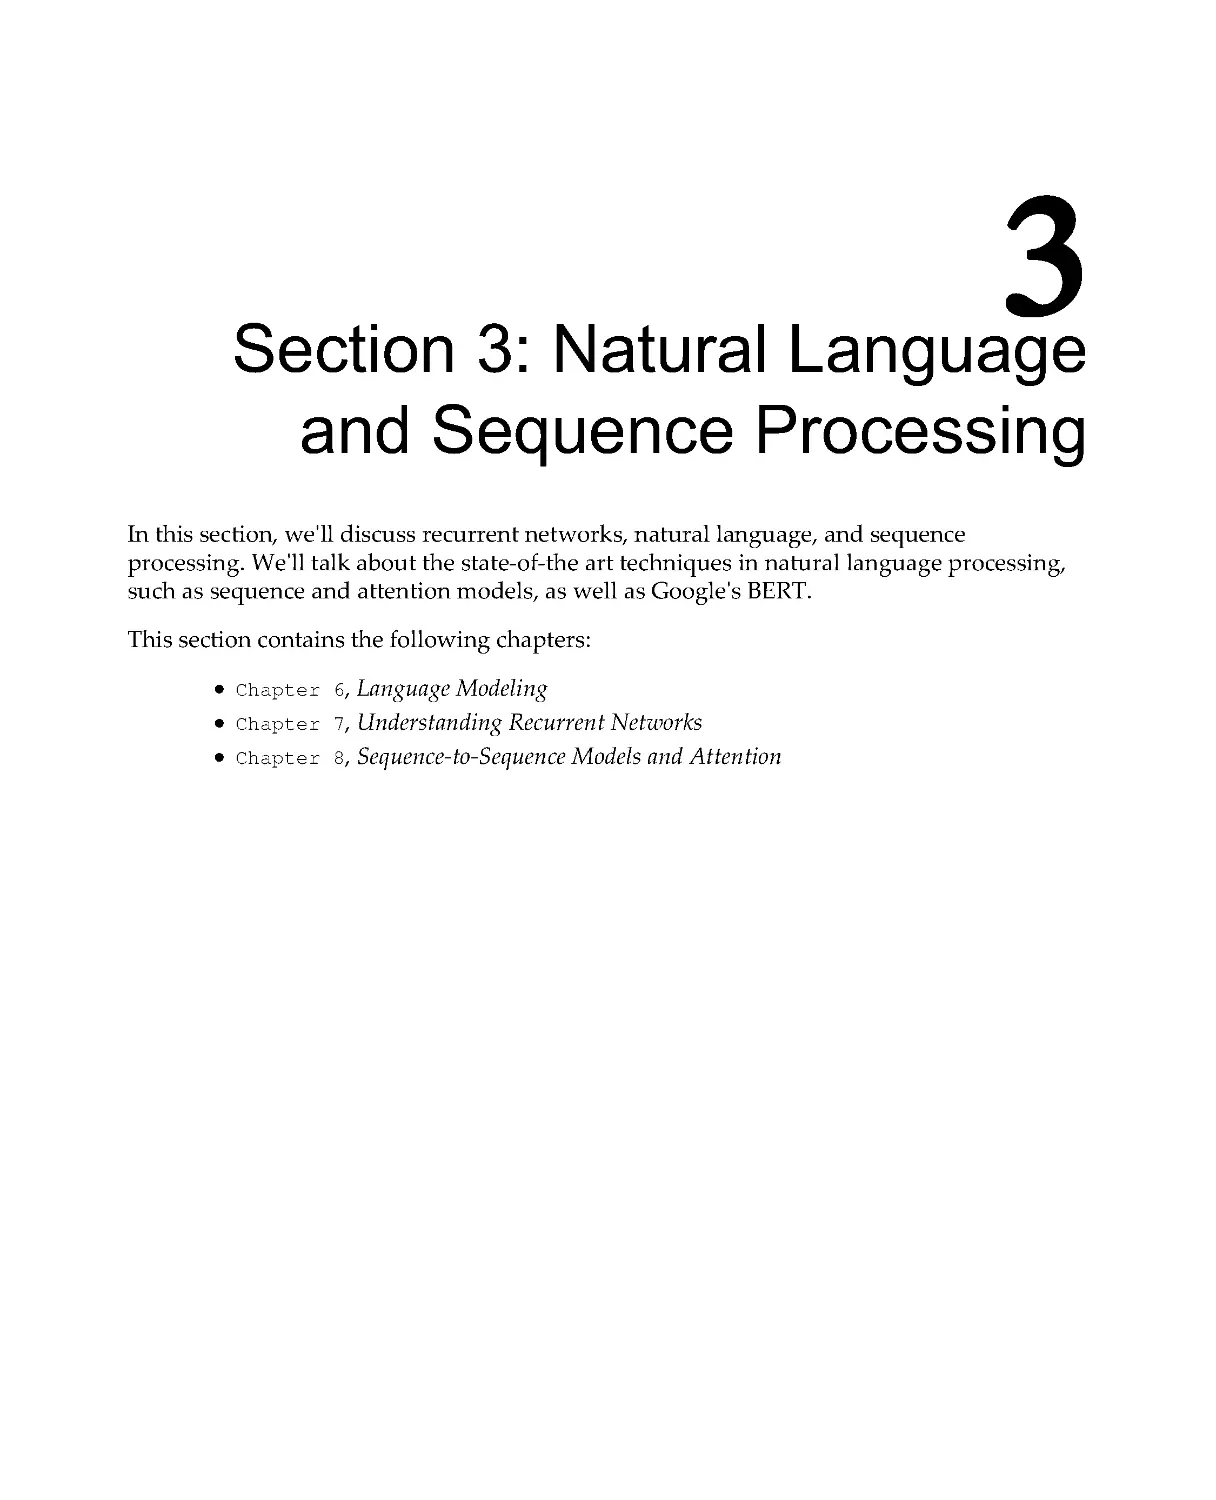 Section 3: Natural Language and Sequence Processing